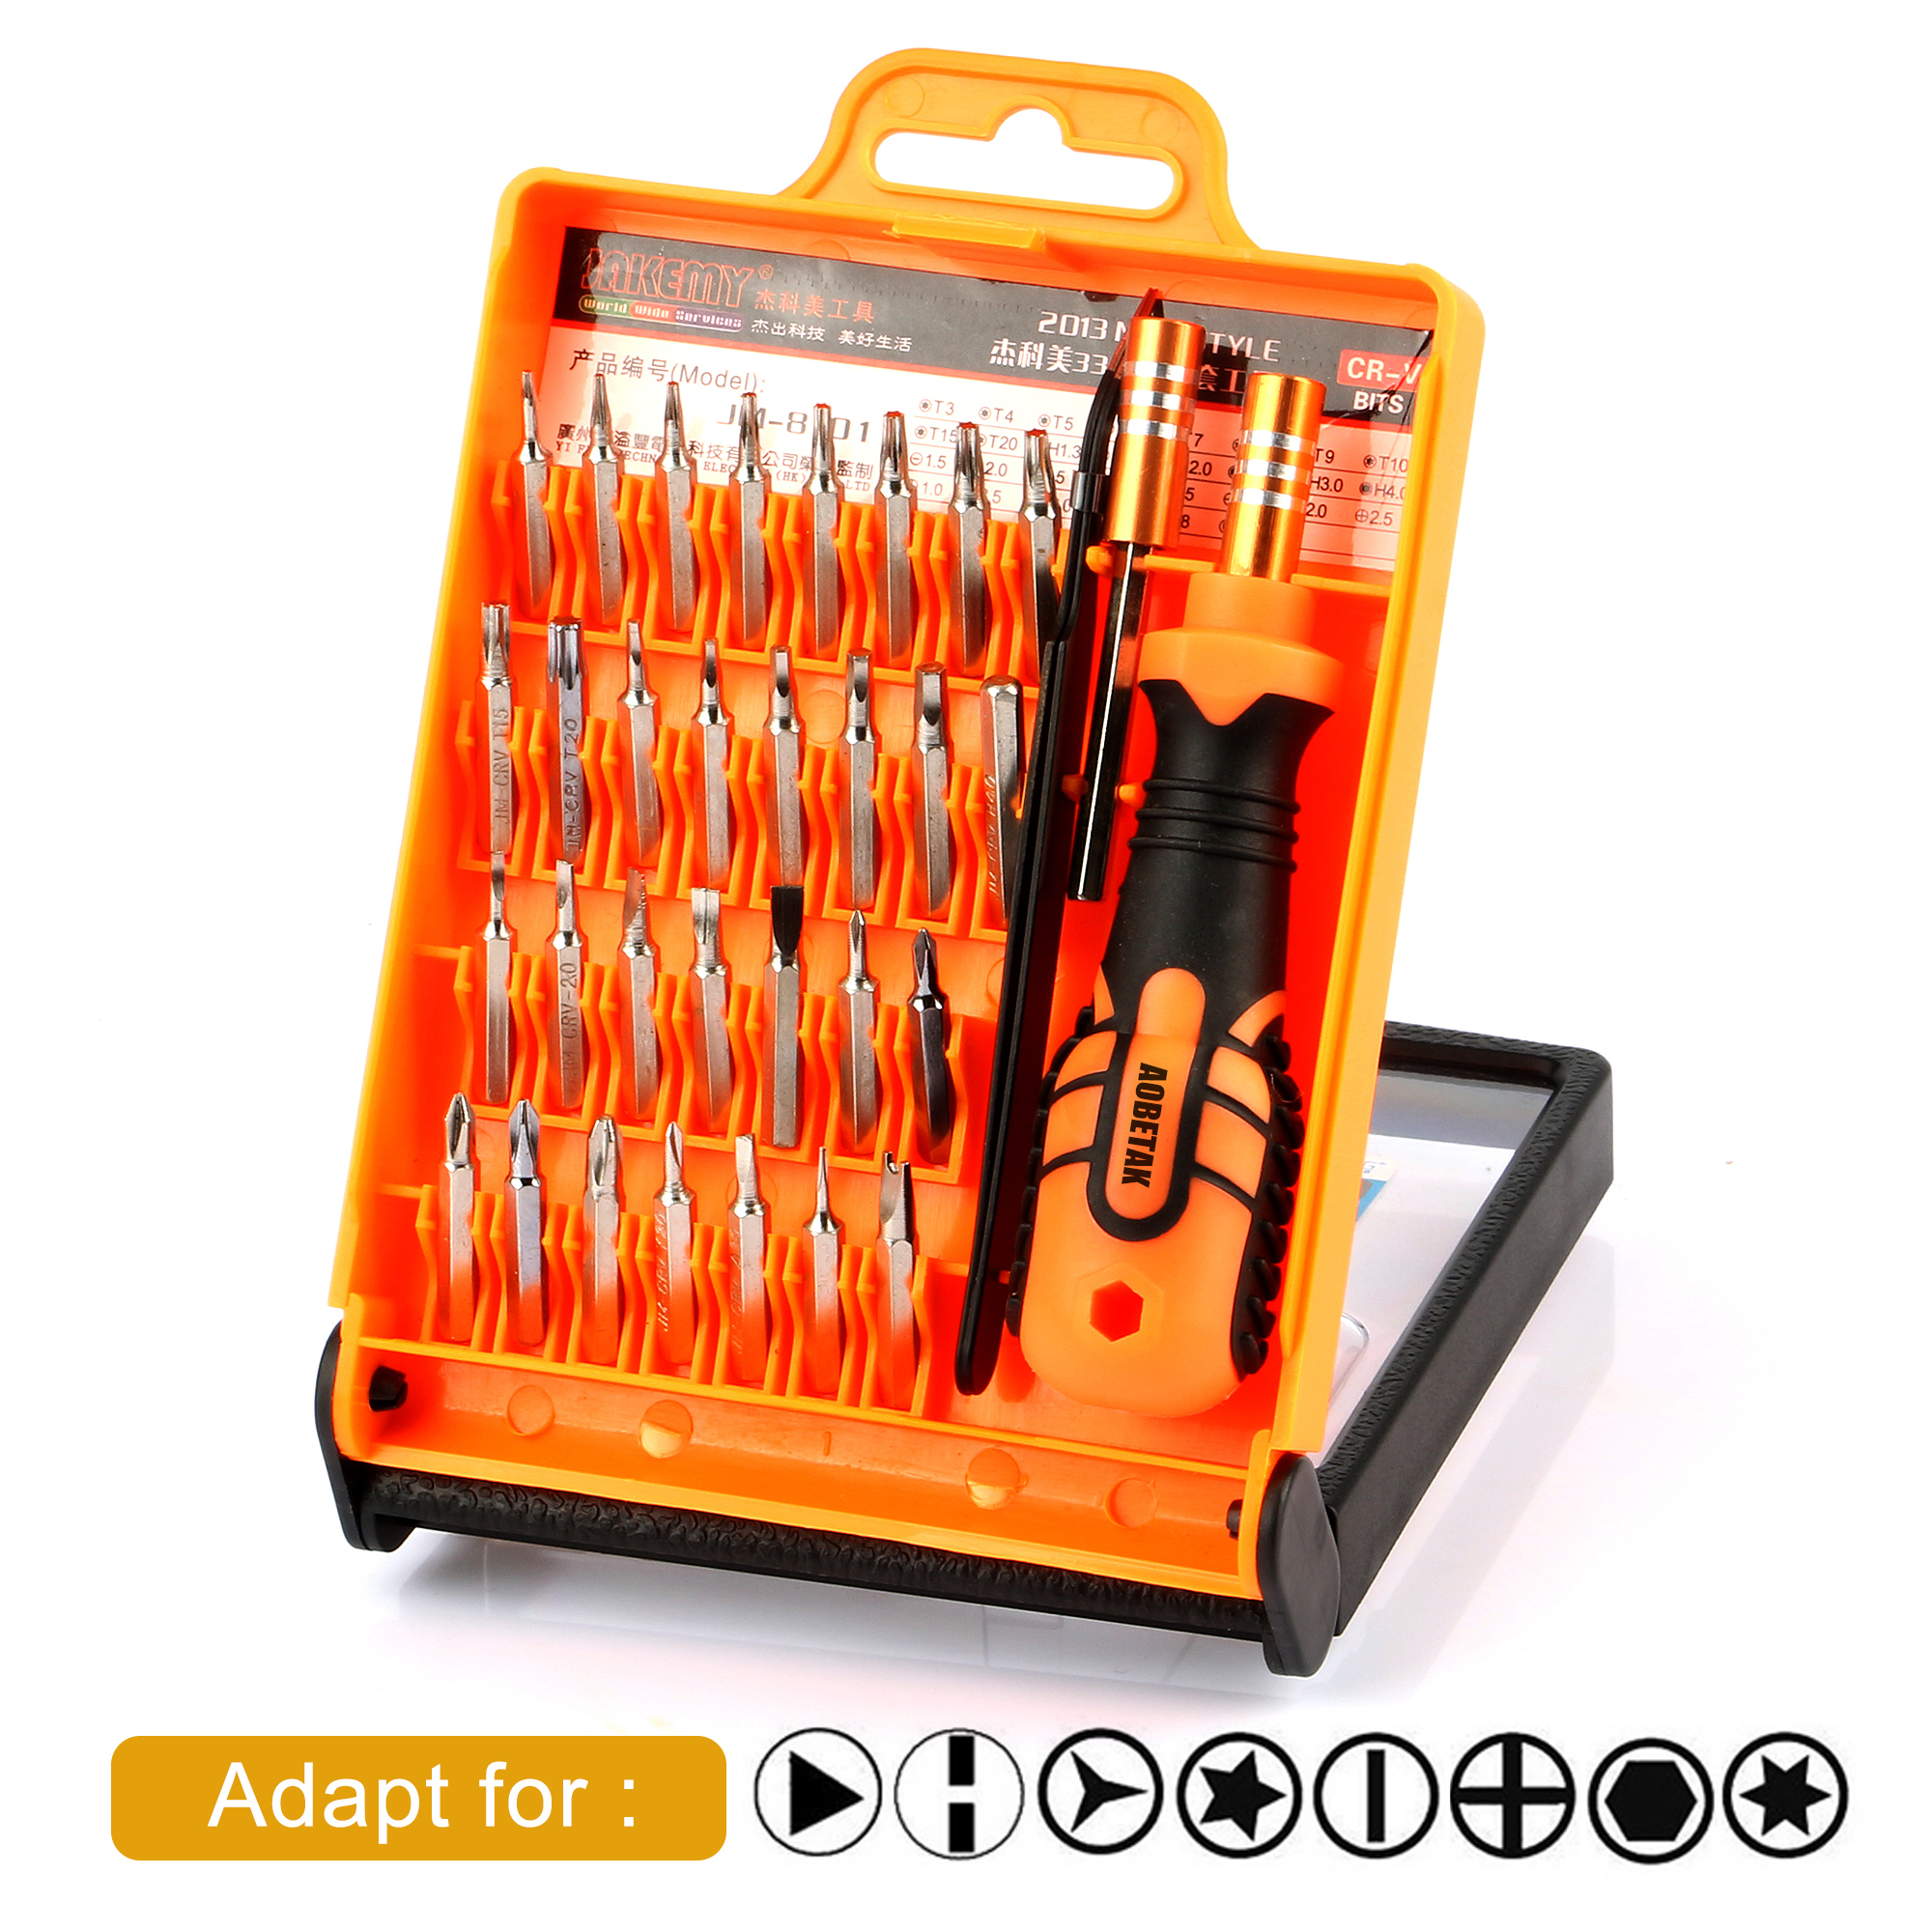 Precision Torx Driver Set, AOBETAK 33 in 1 Magnetic Small Screwdriver Bit Sets with Case Include Pentalobe/Ratchet/Hex/Star/Phillips,Mini Repair Tool Kit for Electronic Iphone Laptops PC Watch Glasses